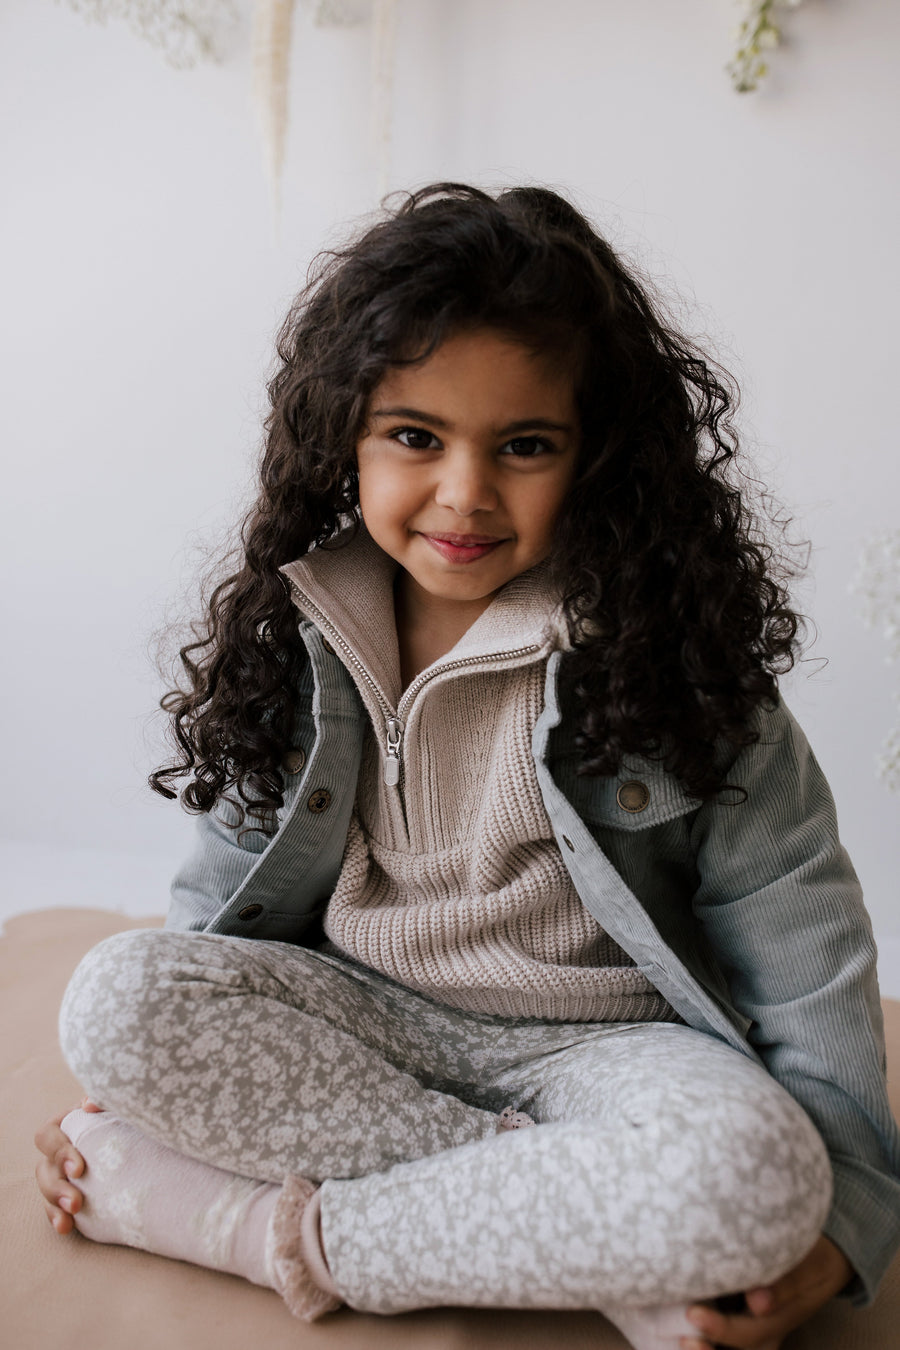 Jack Zip Jersey - Cove Childrens Knitwear from Jamie Kay USA